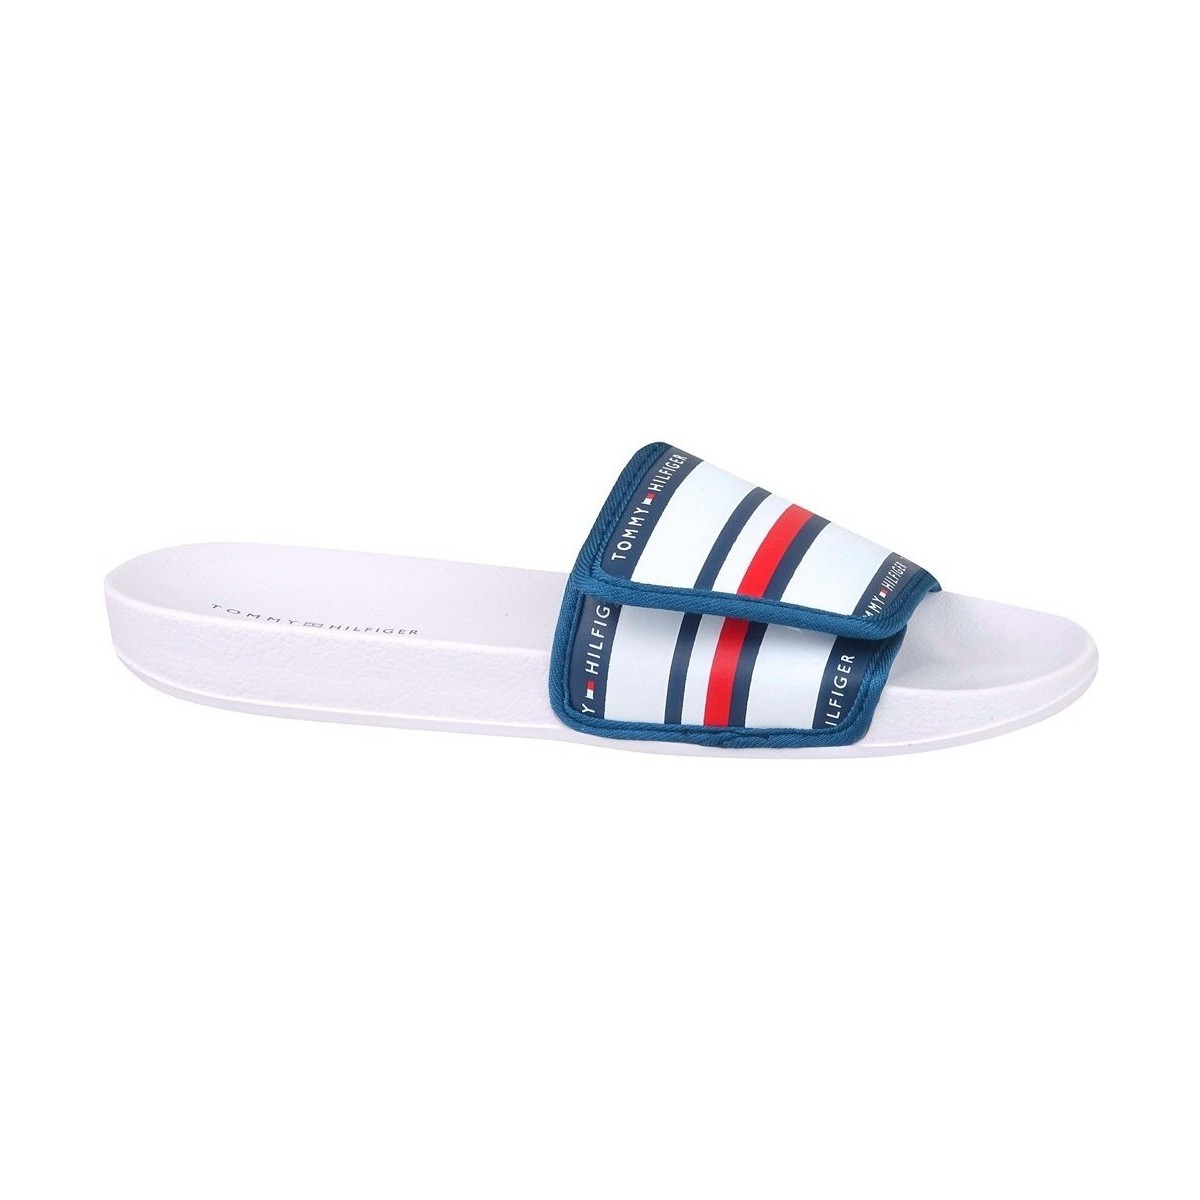 Shoes Children Water shoes Tommy Hilfiger Maxi Velcro Pool Slide White